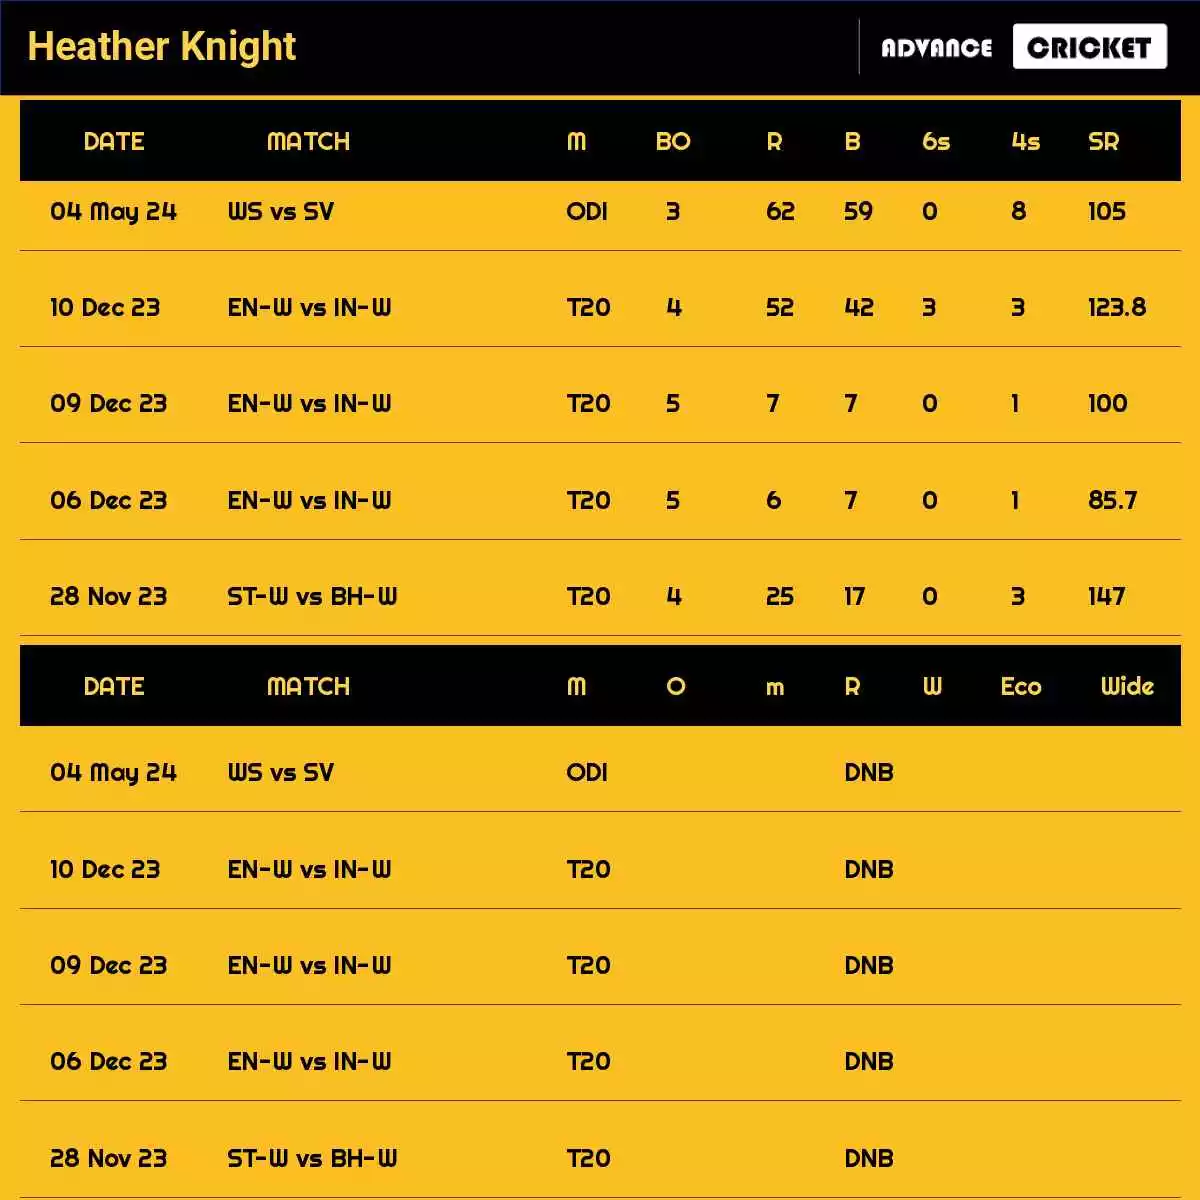 Heather Knight Recent Matches Details Date Wise